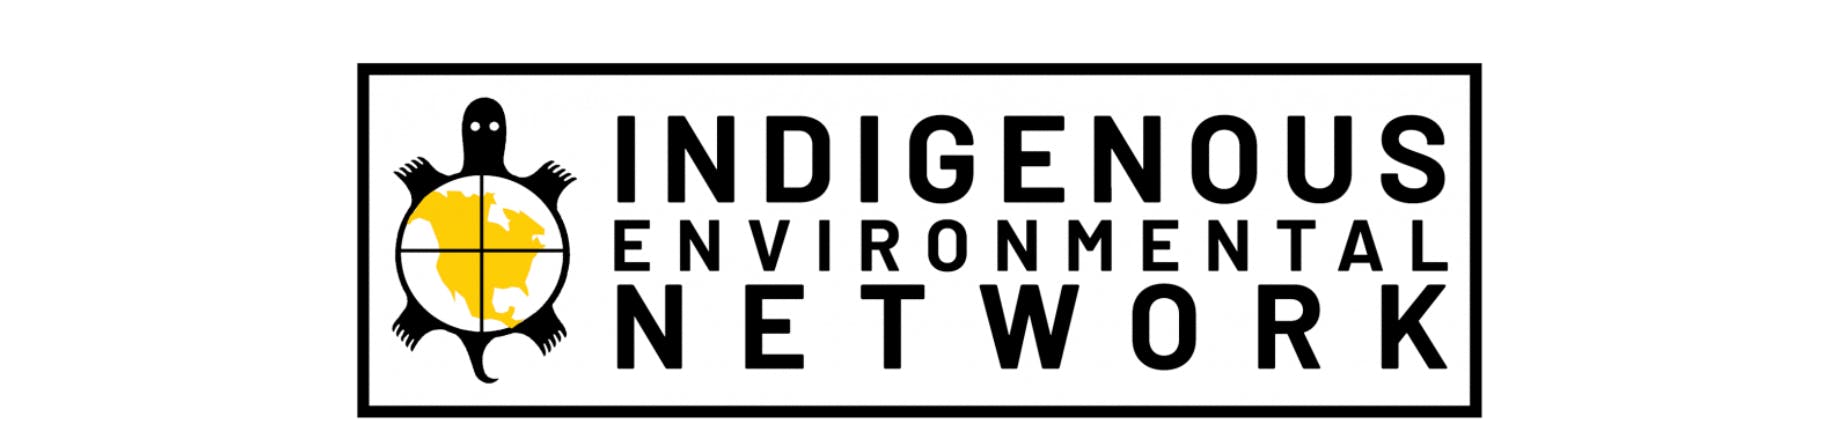 The logo for Indigenous Environmental Network.